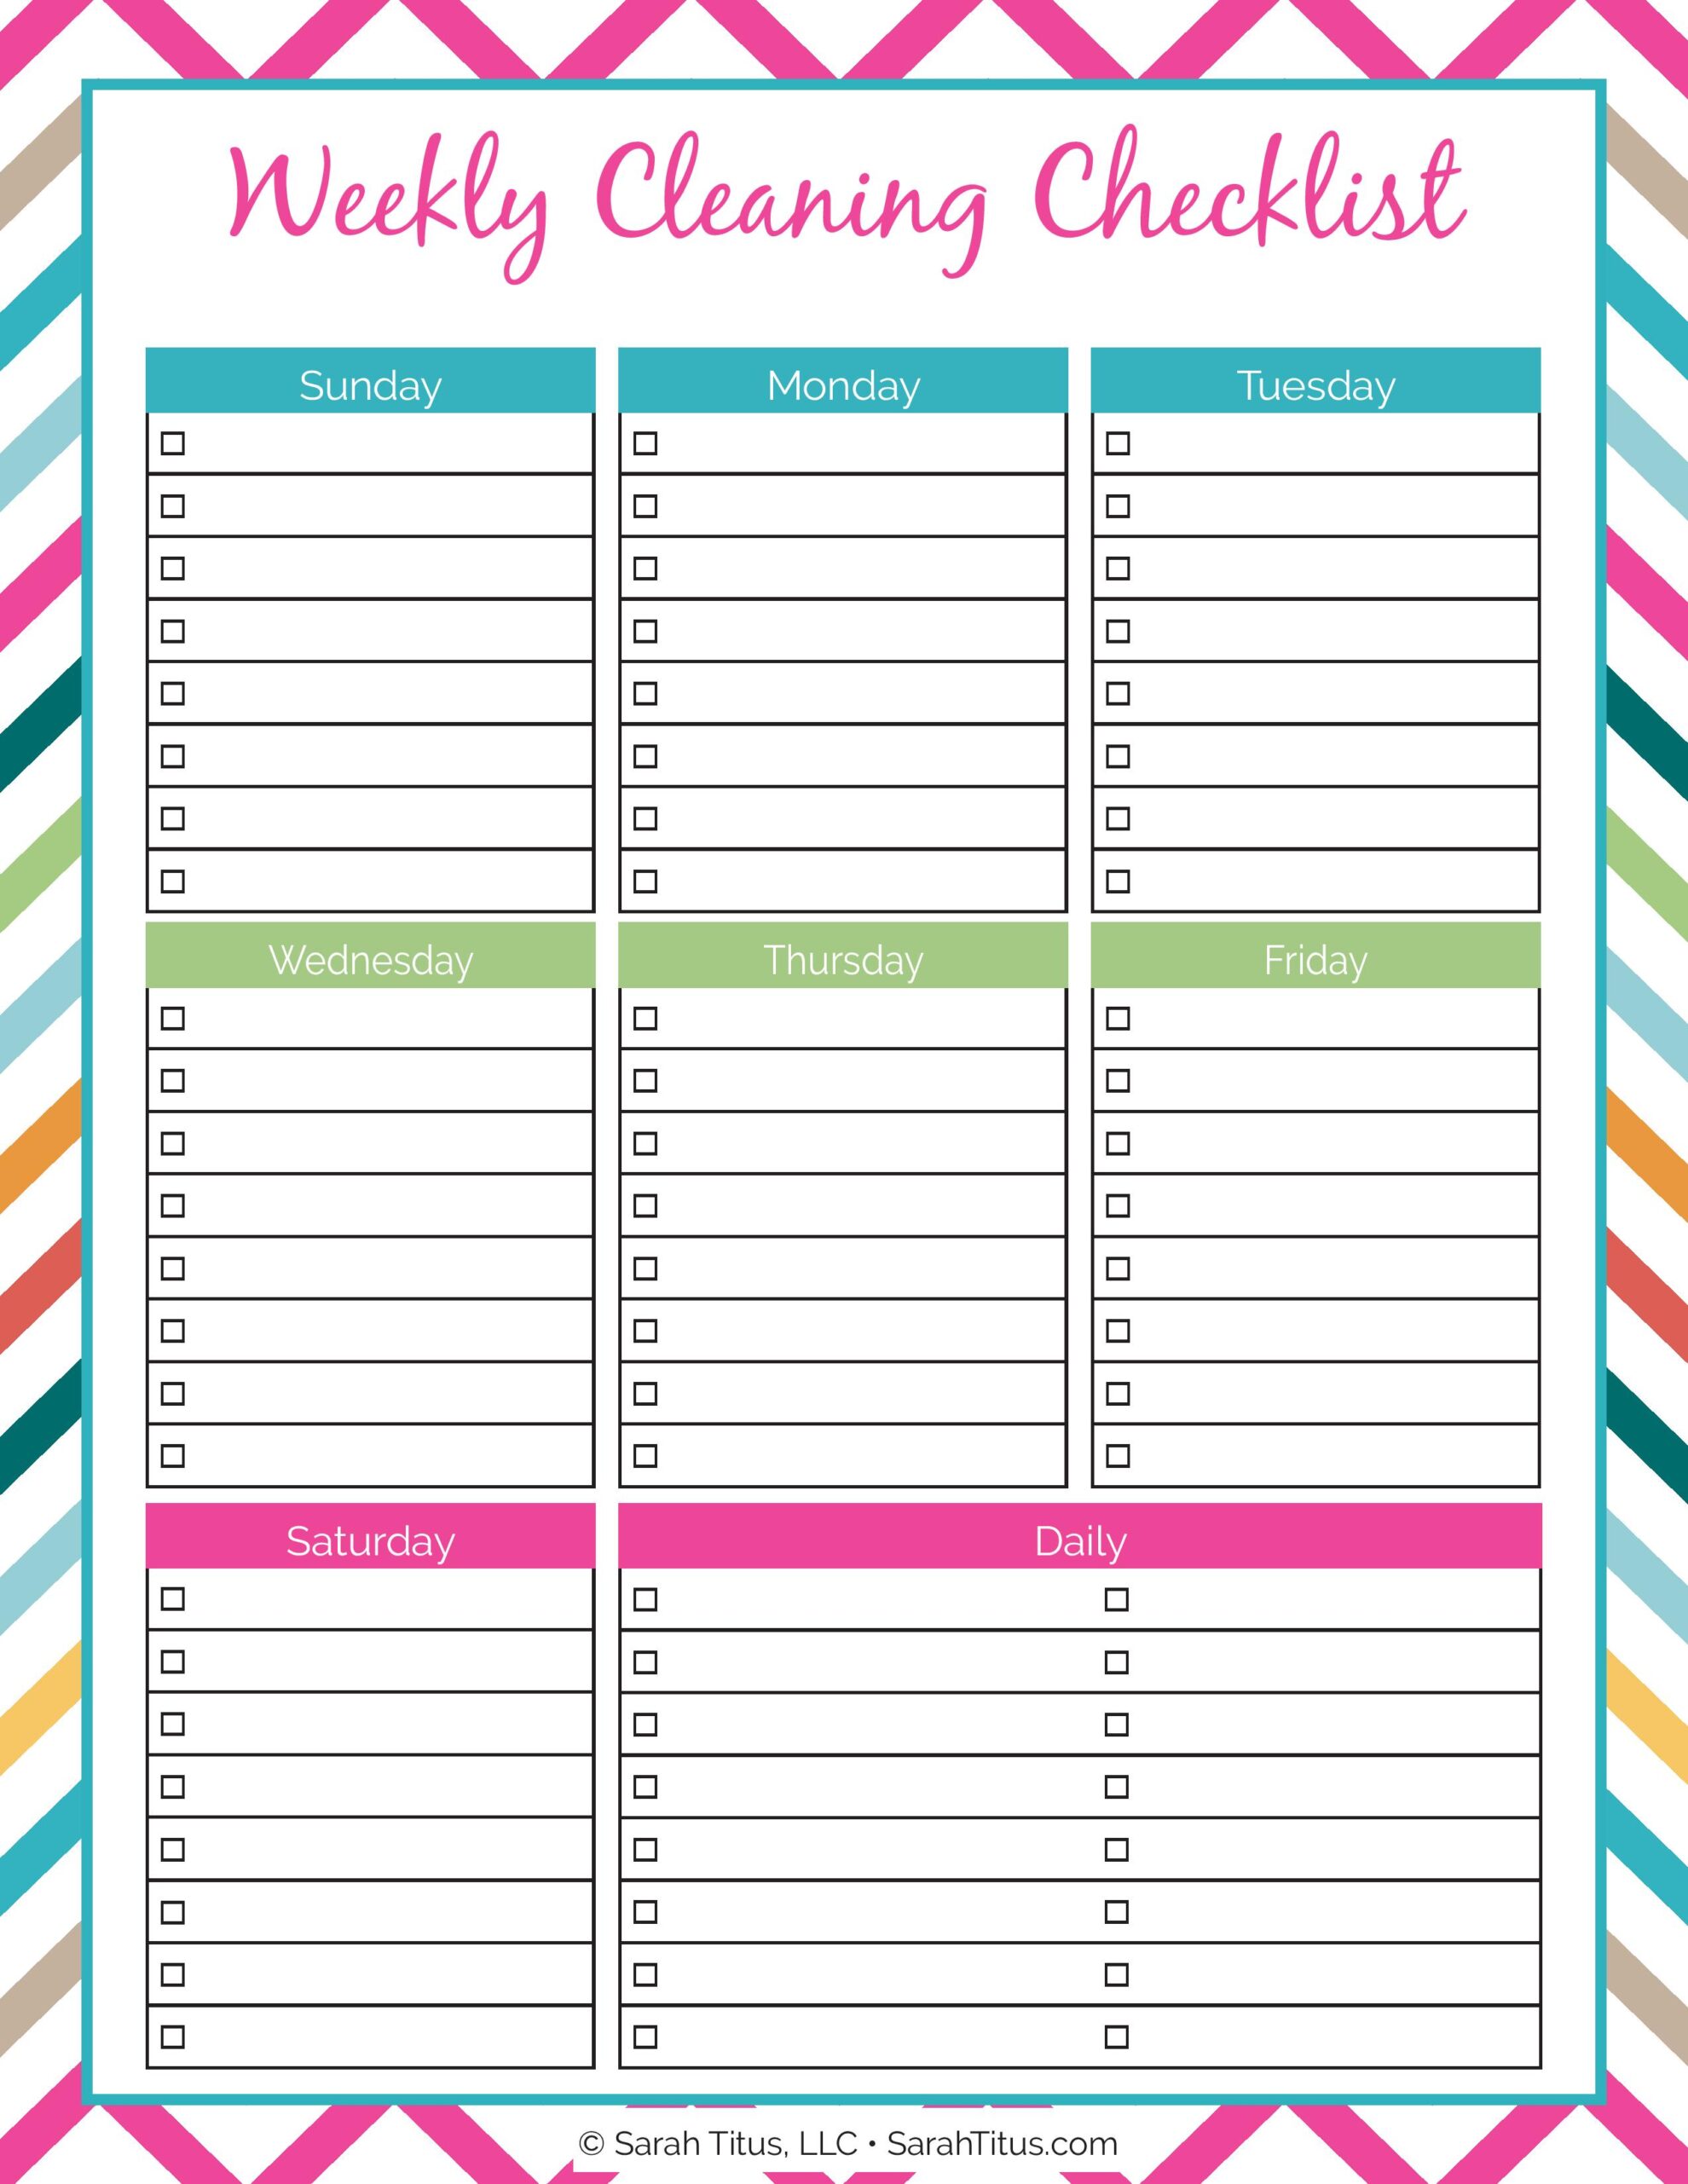 If you're an organization freak like me who just loves having everything all tidy, this Printable Weekly Cleaning Checklist will be so helpful!